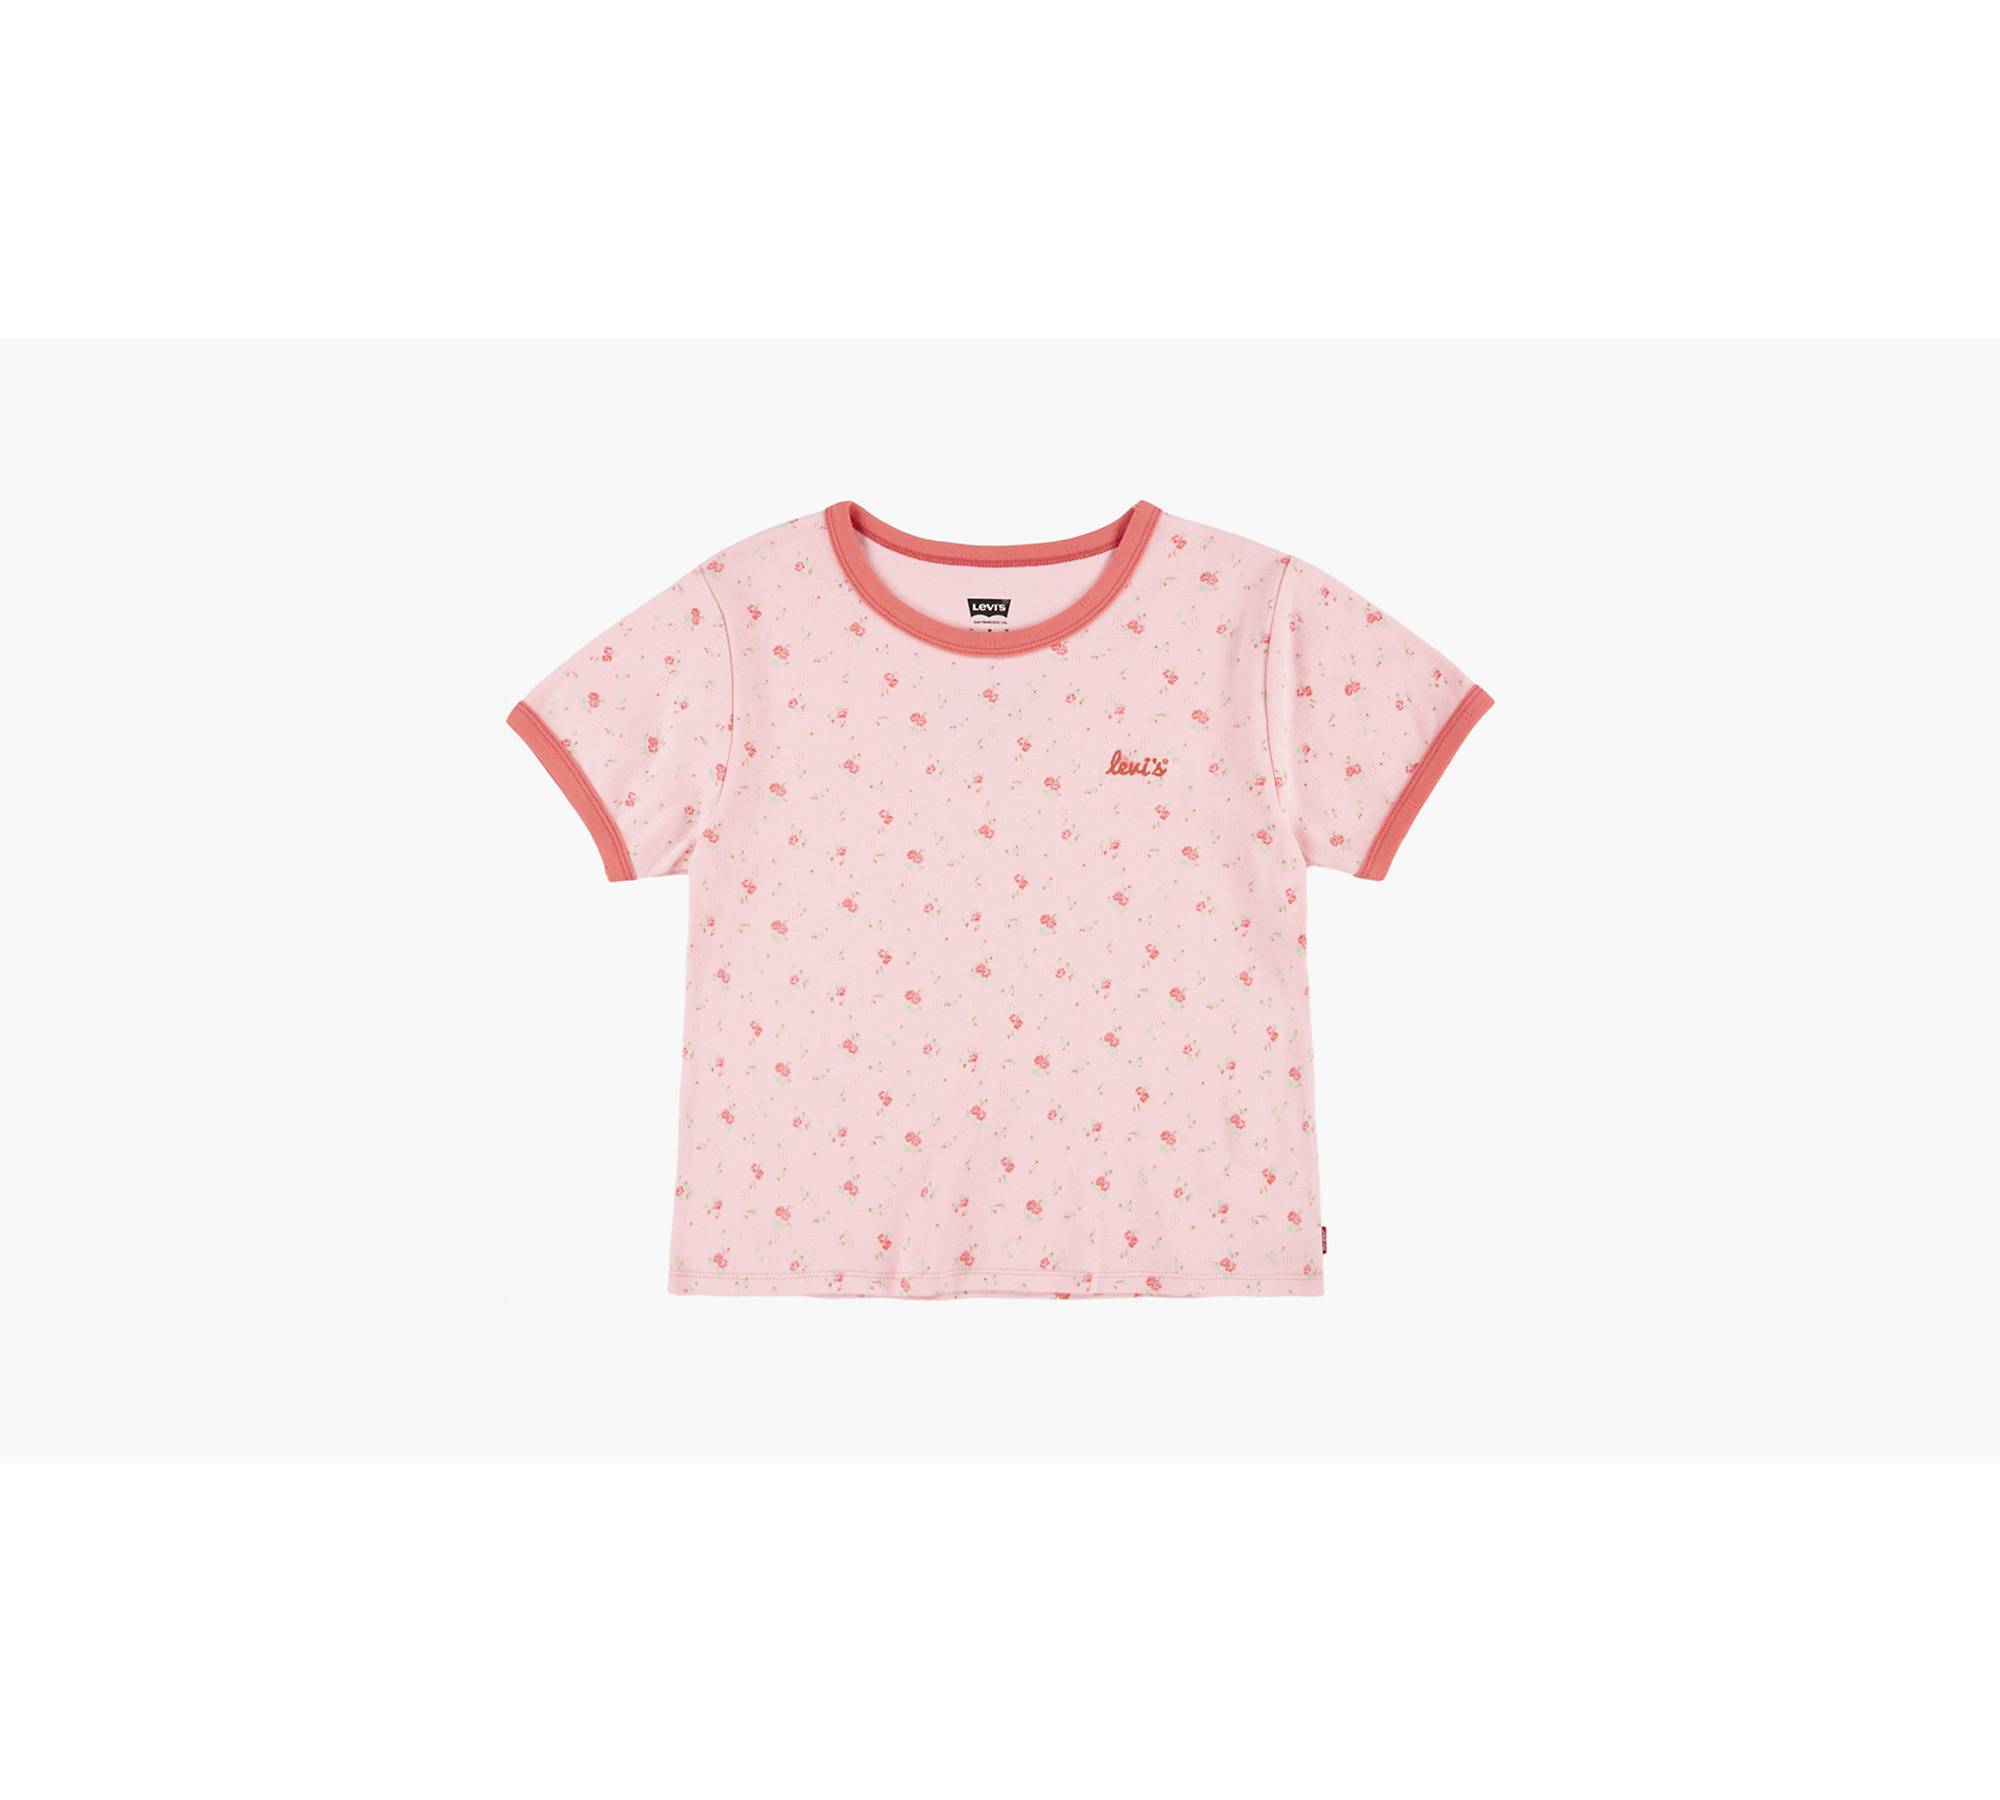 Ditsy Floral Top Big Girls S-xl - Pink | Levi's® US